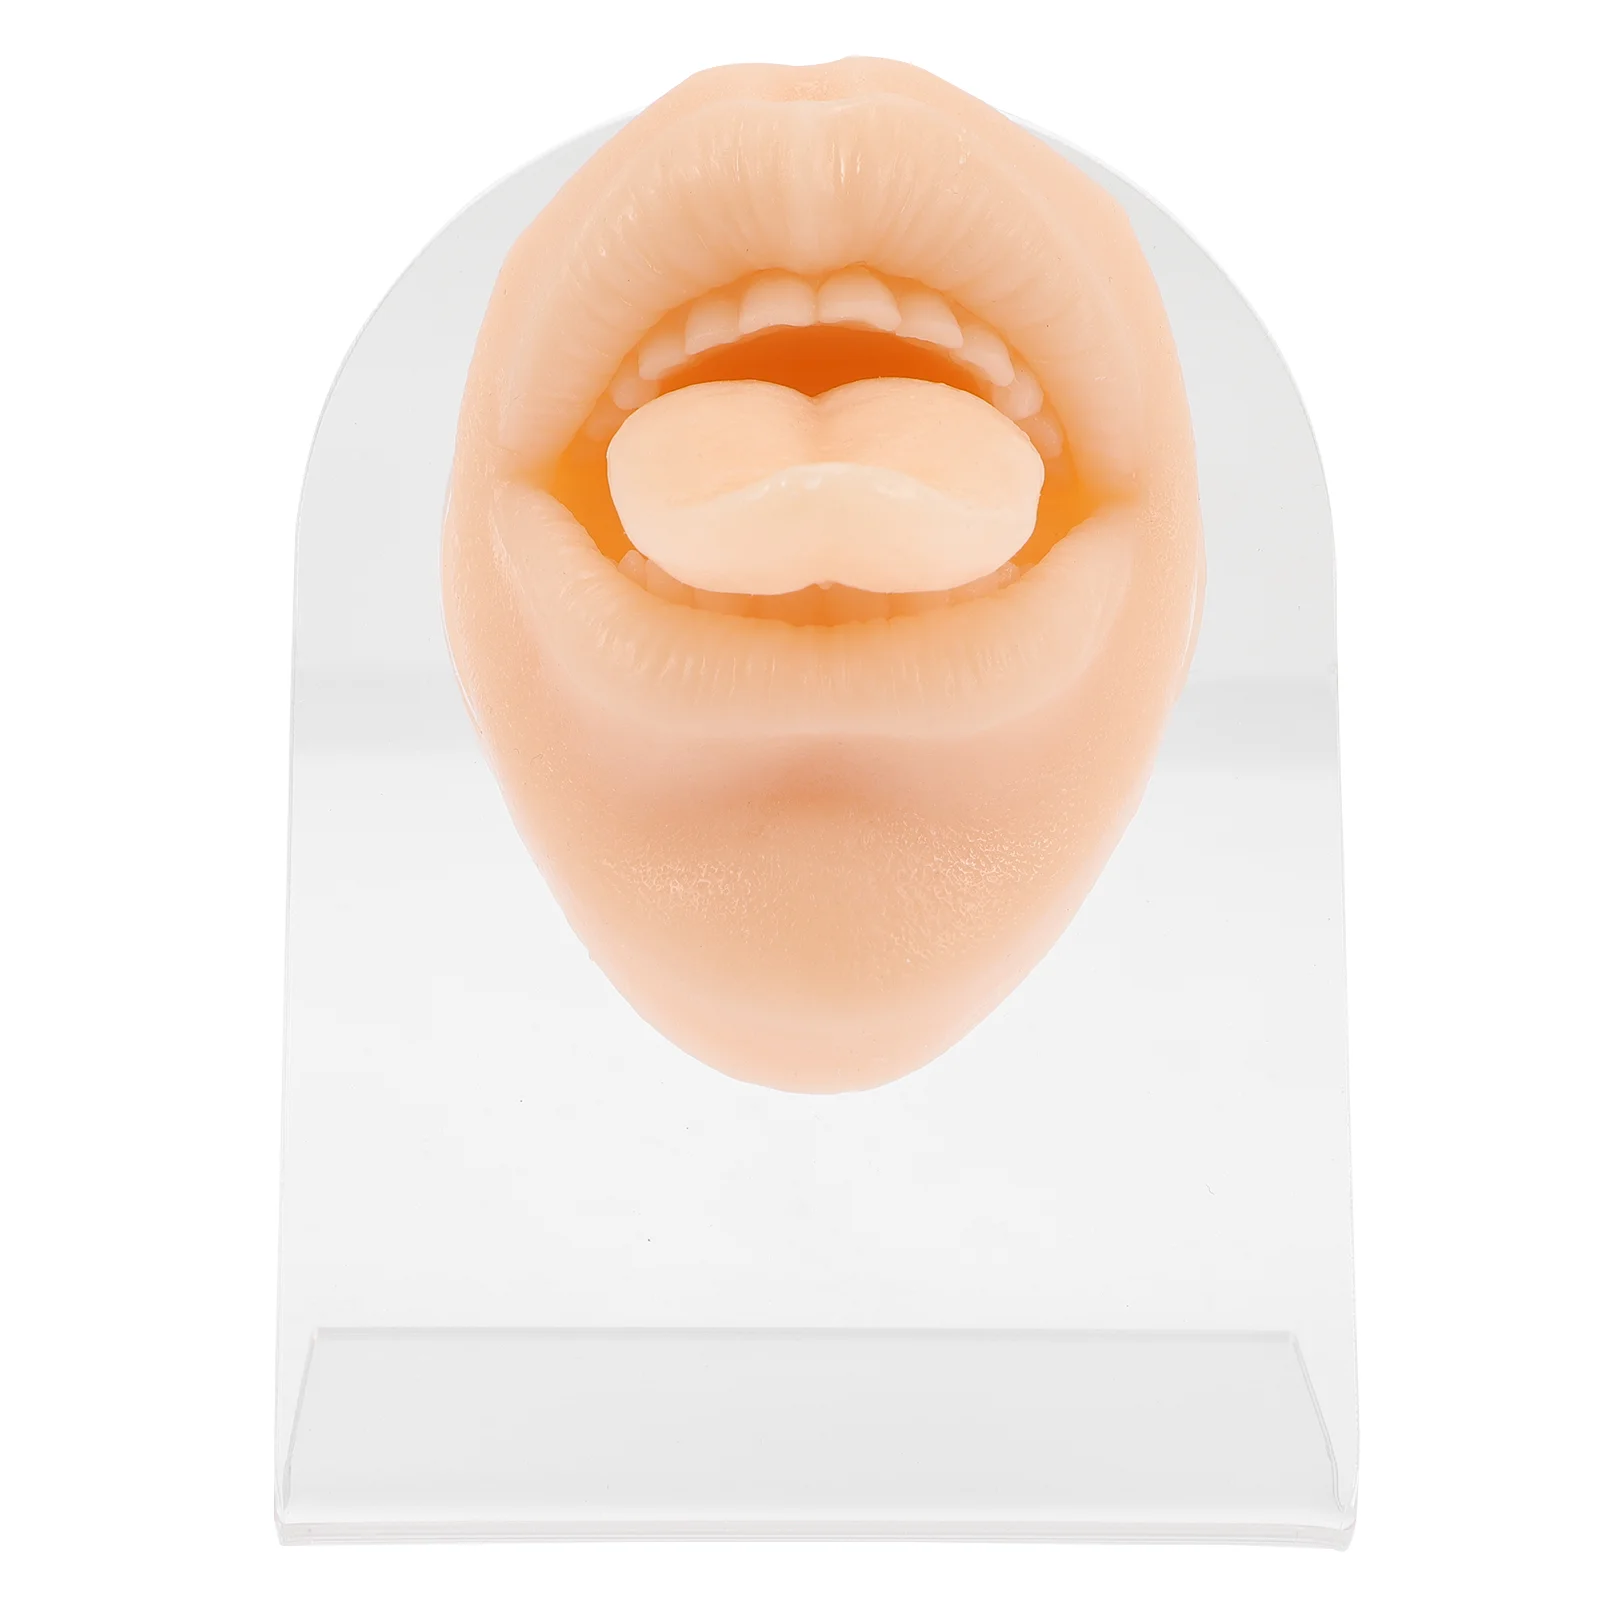 Silicone Simulation Tongue Model for Piercing Practice Piercing Ring Display